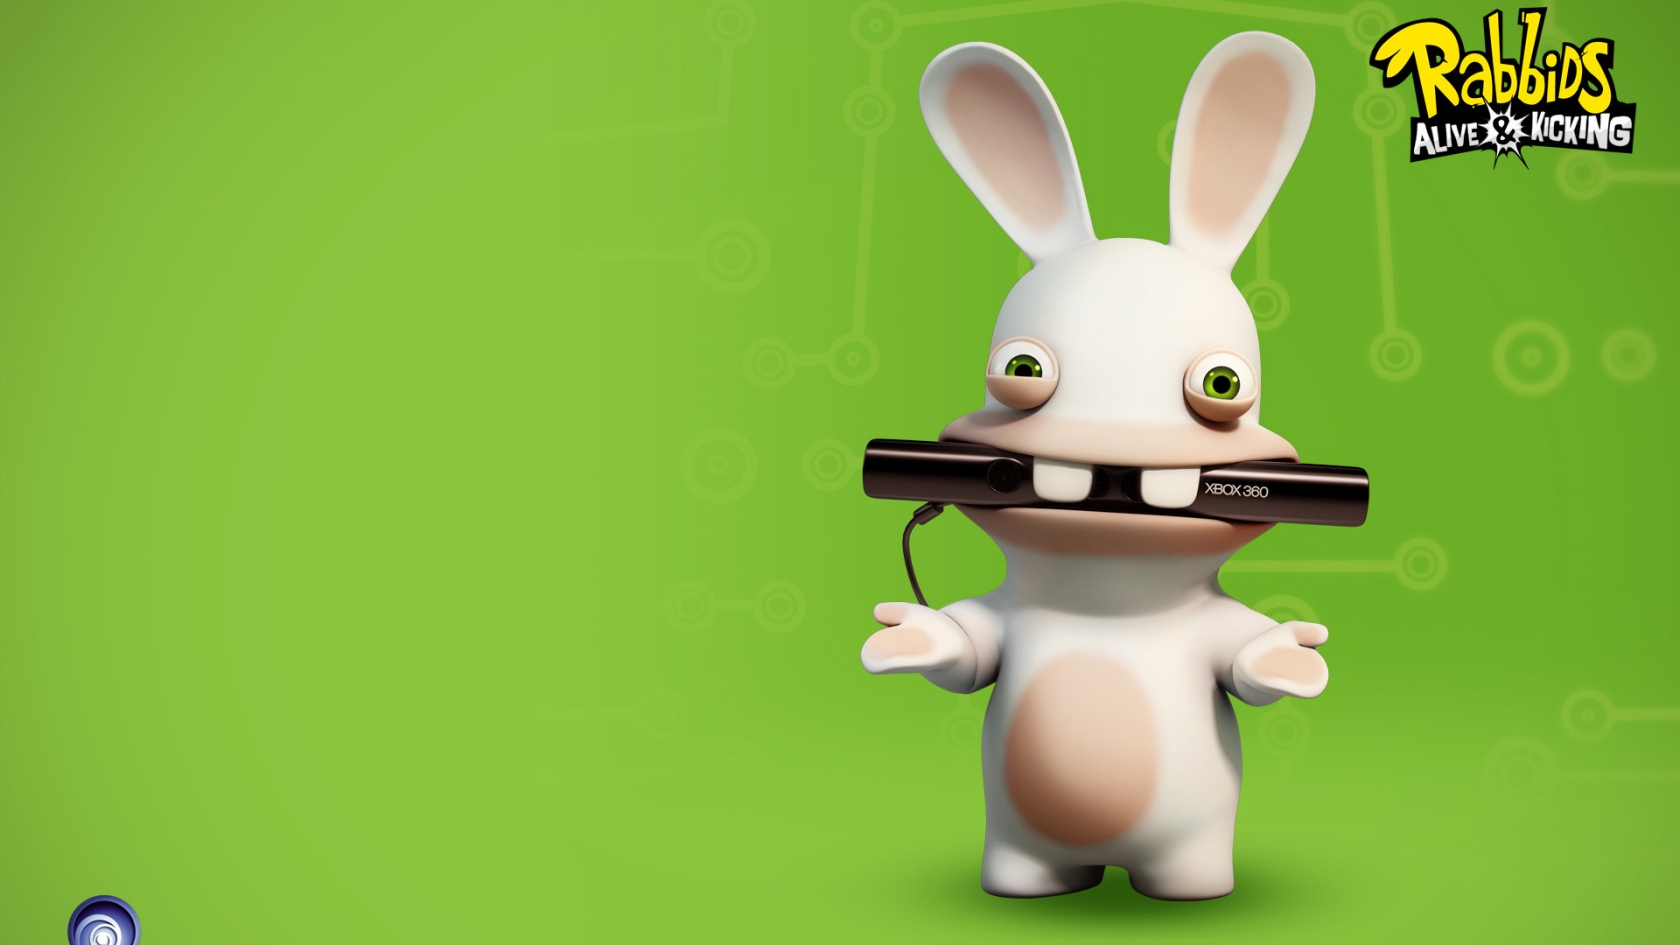 Rabbids Alive and Kicking Game for 1680 x 945 HDTV resolution